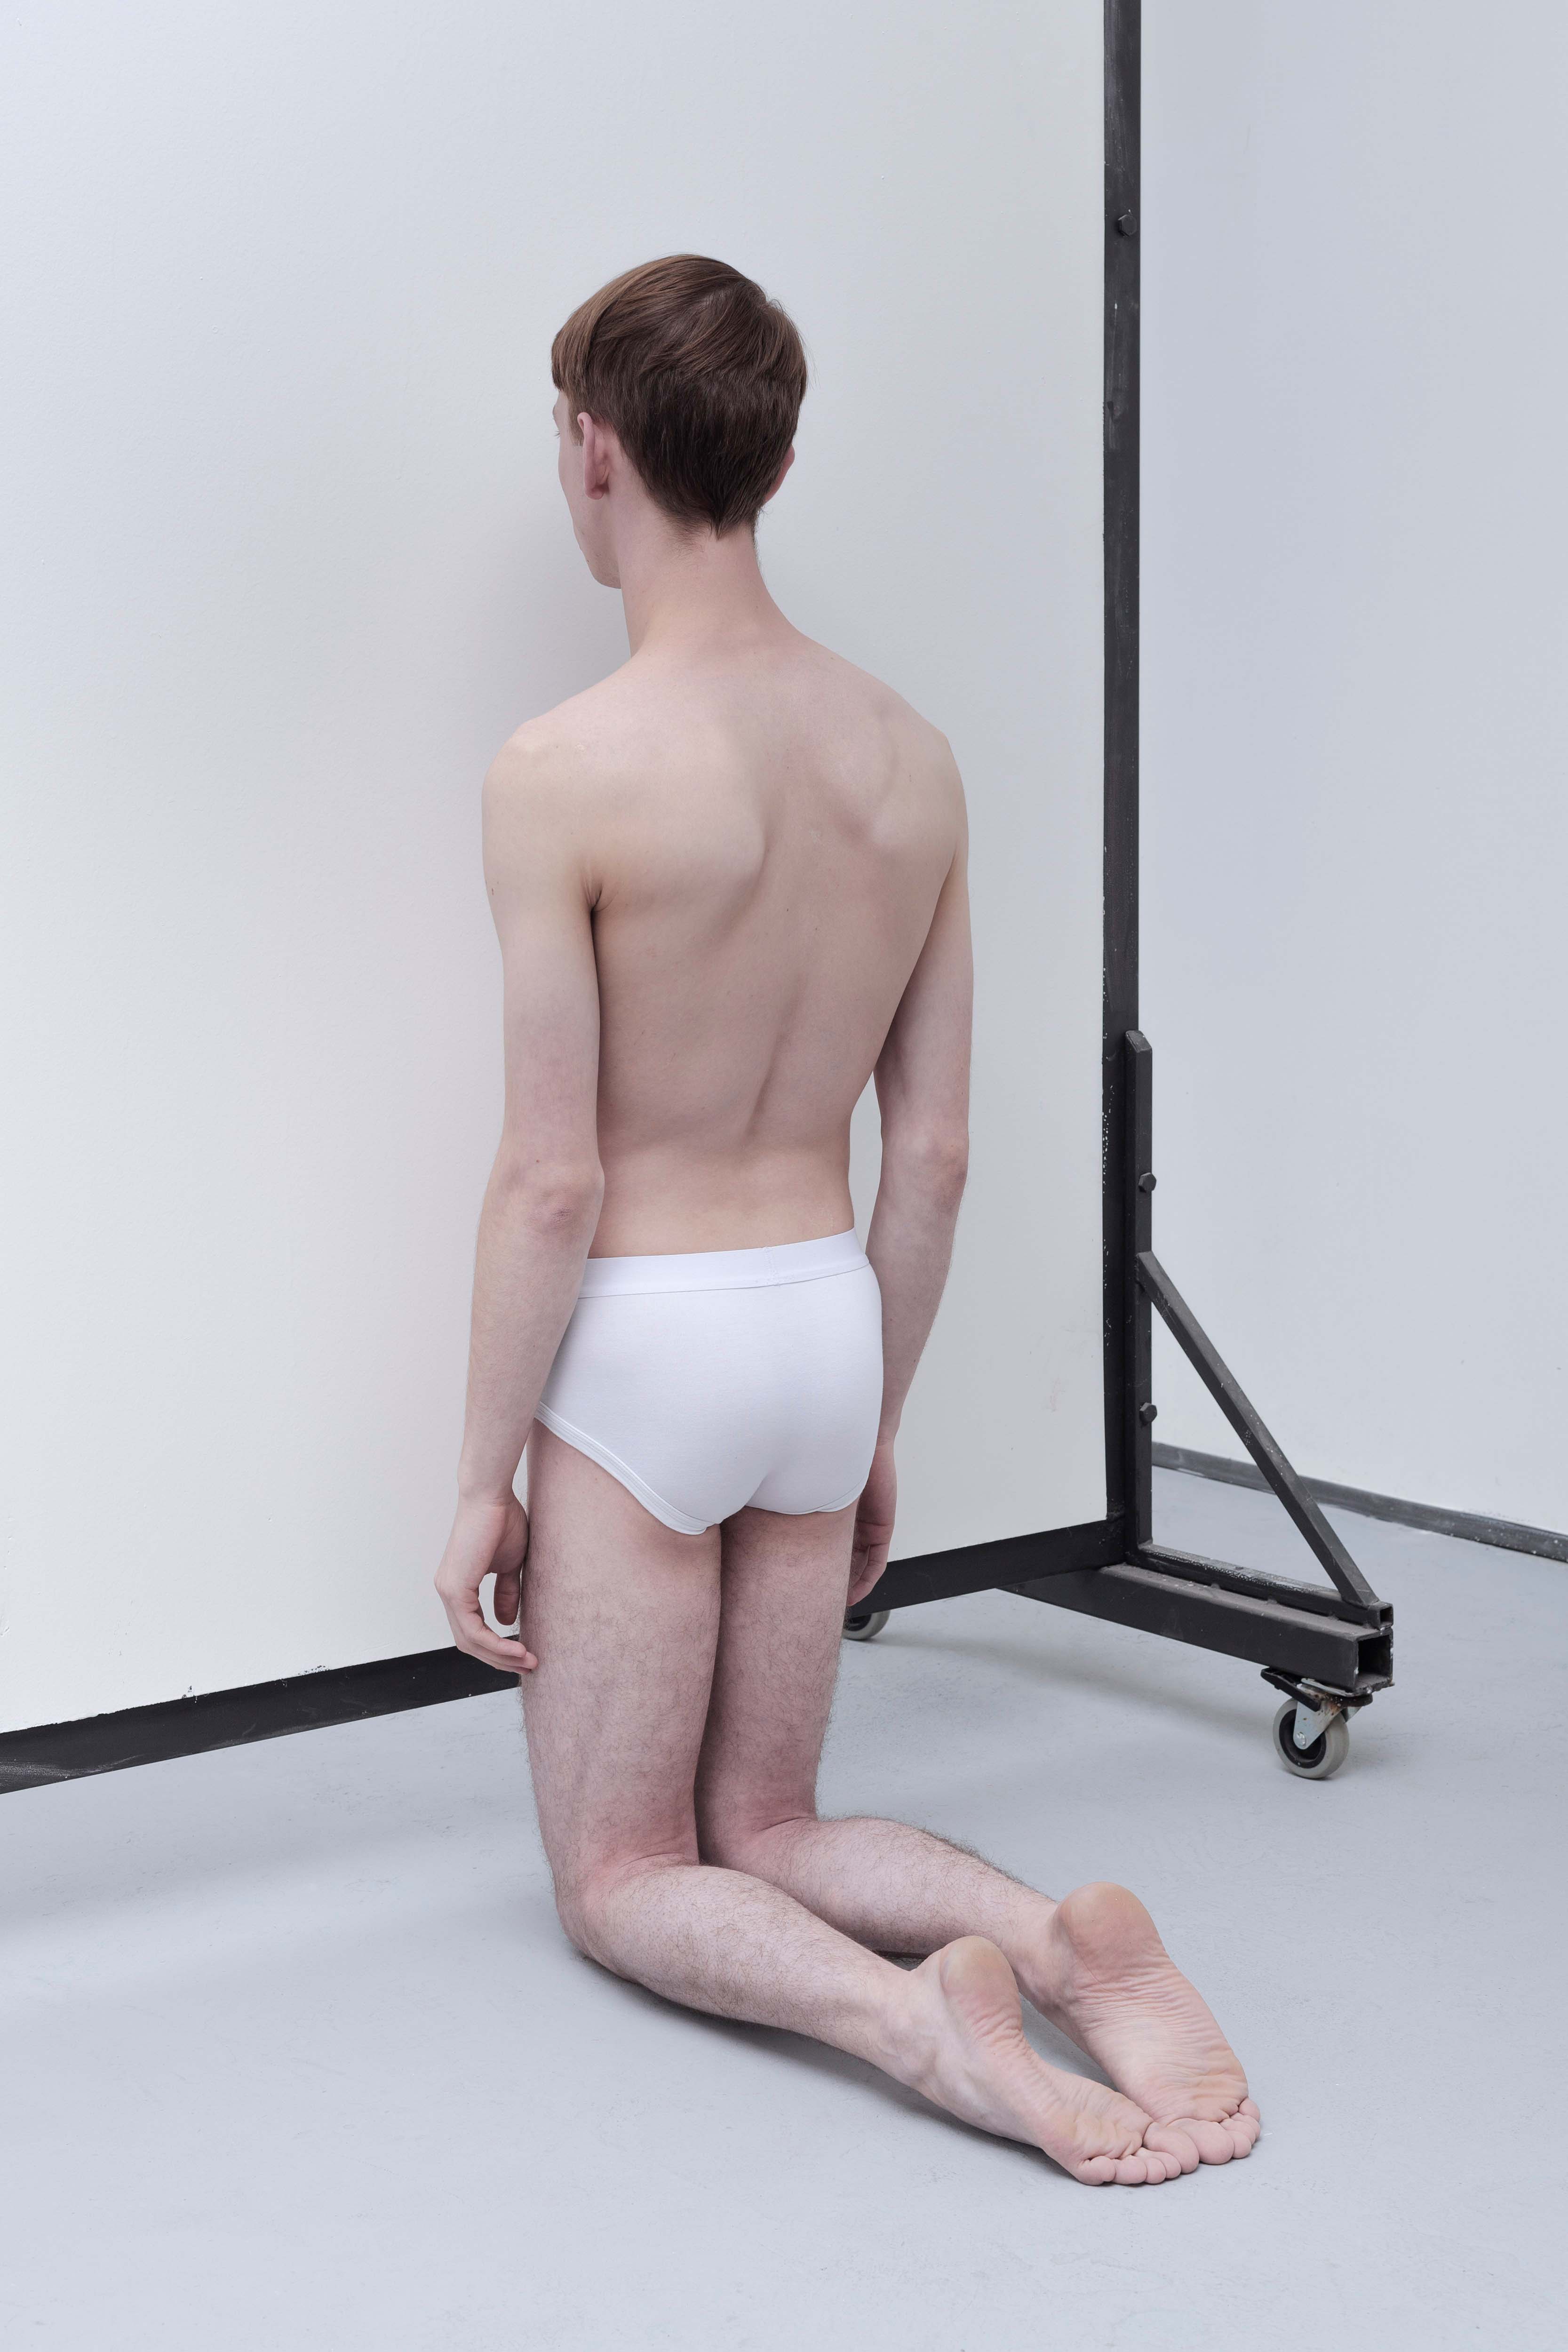 The exhibition project brings performance and installation together. A semi-naked young man kneels against the wall motionless. The viewer does not see his face; he remains anonymous. It is not clear whether he is praying or whether it is an act of punishment.